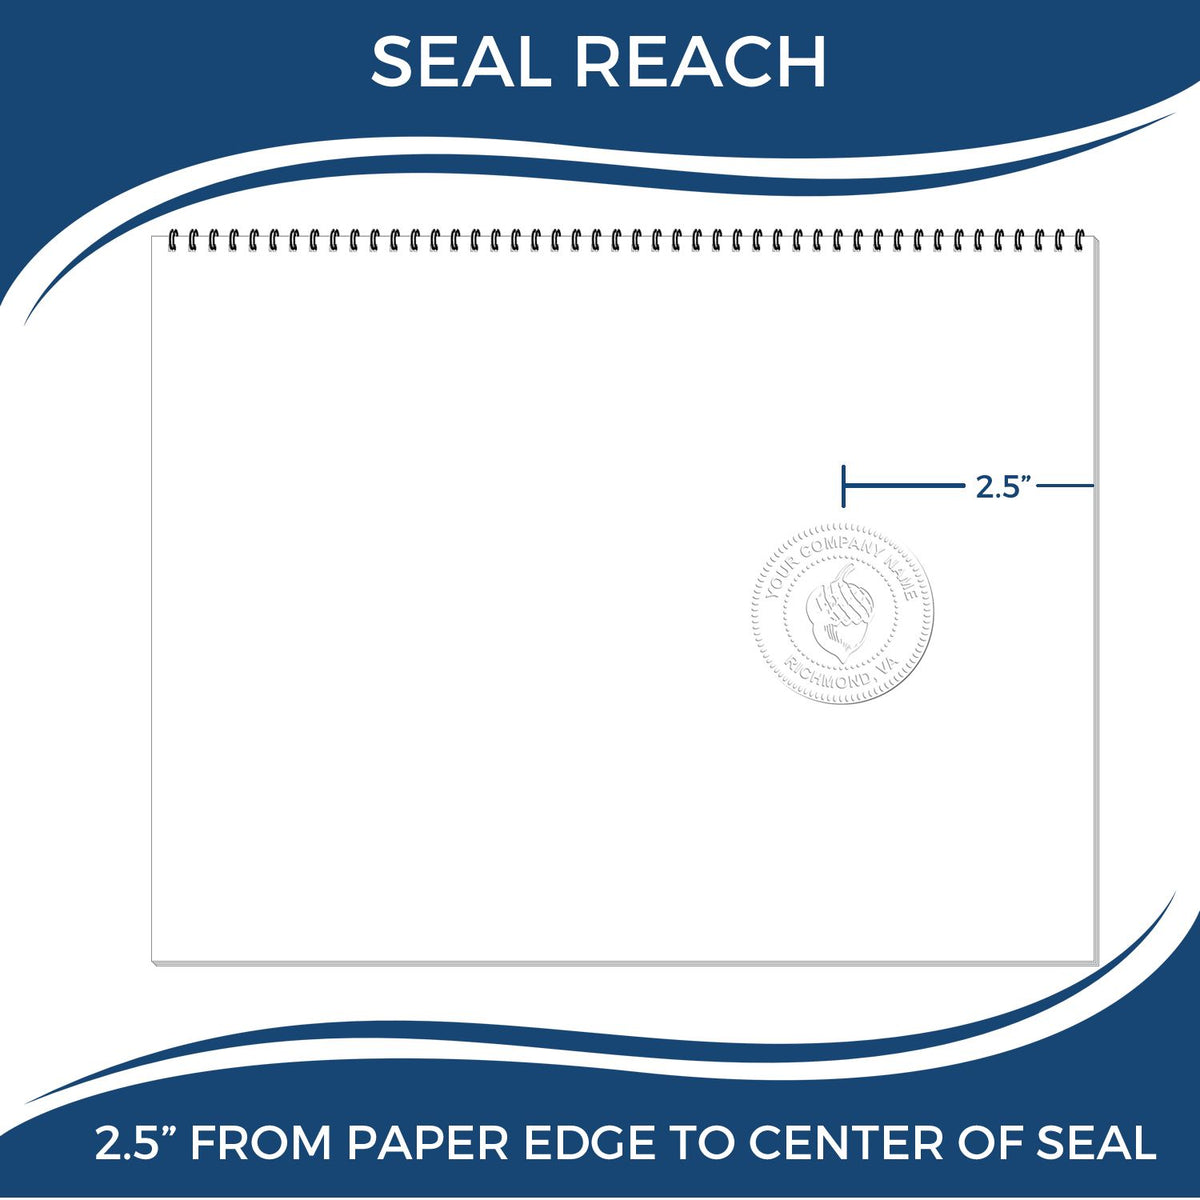 An infographic showing the seal reach which is represented by a ruler and a miniature seal image of the Heavy Duty Cast Iron Alabama Land Surveyor Seal Embosser